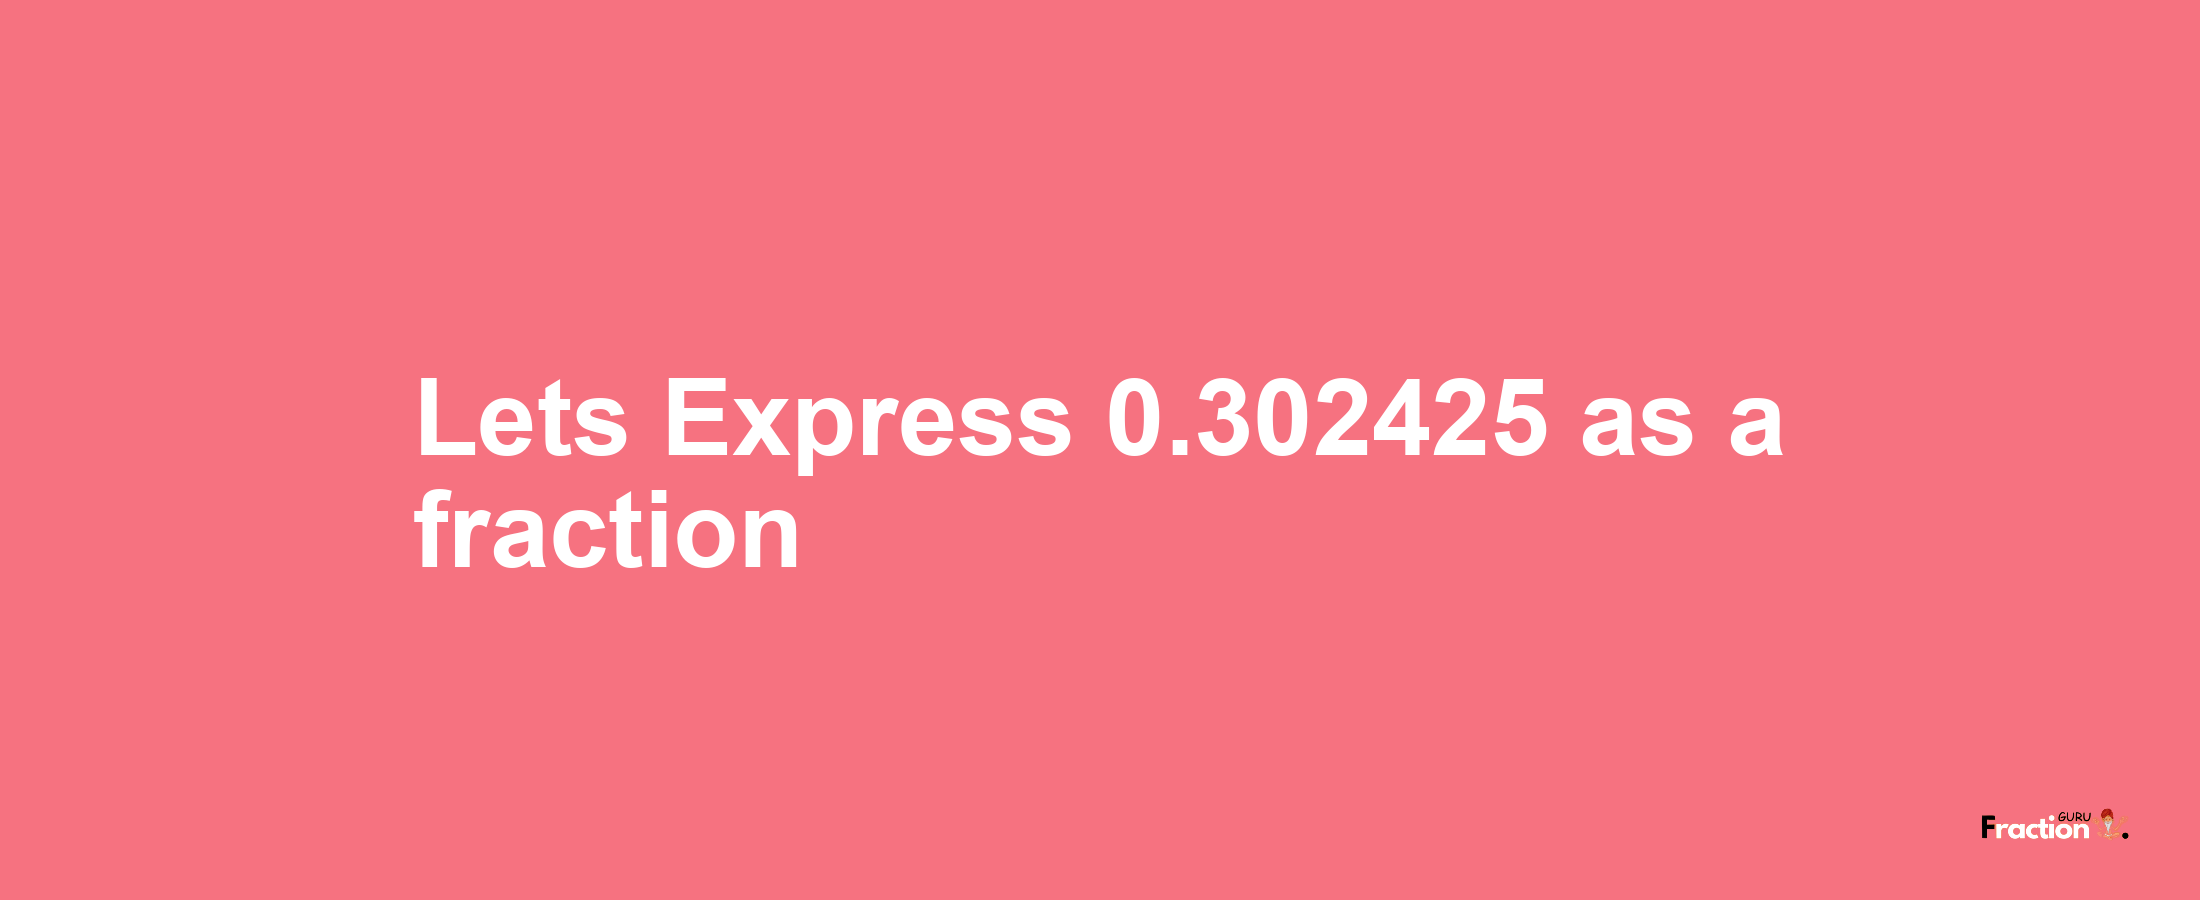 Lets Express 0.302425 as afraction